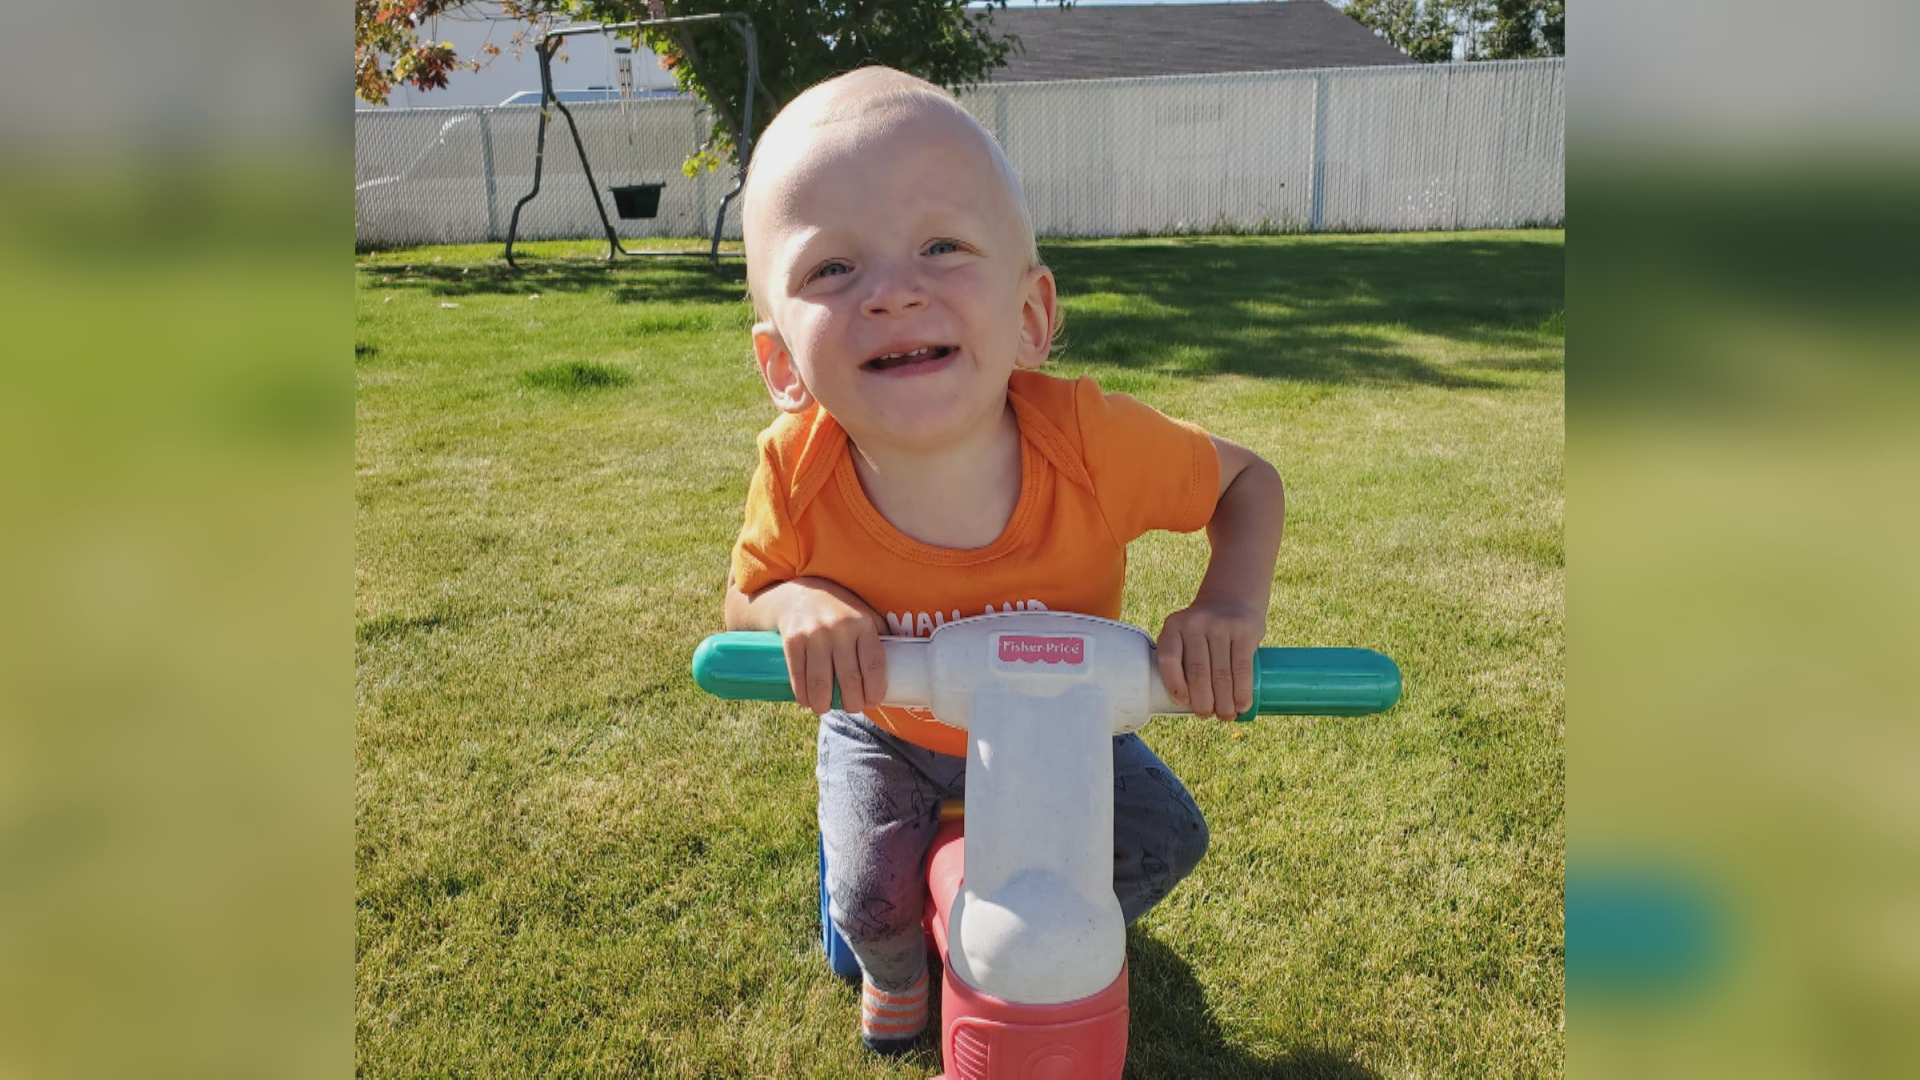 Max Sych’s family is pushing to raise millions of dollars to cure his spinal muscular atrophy.